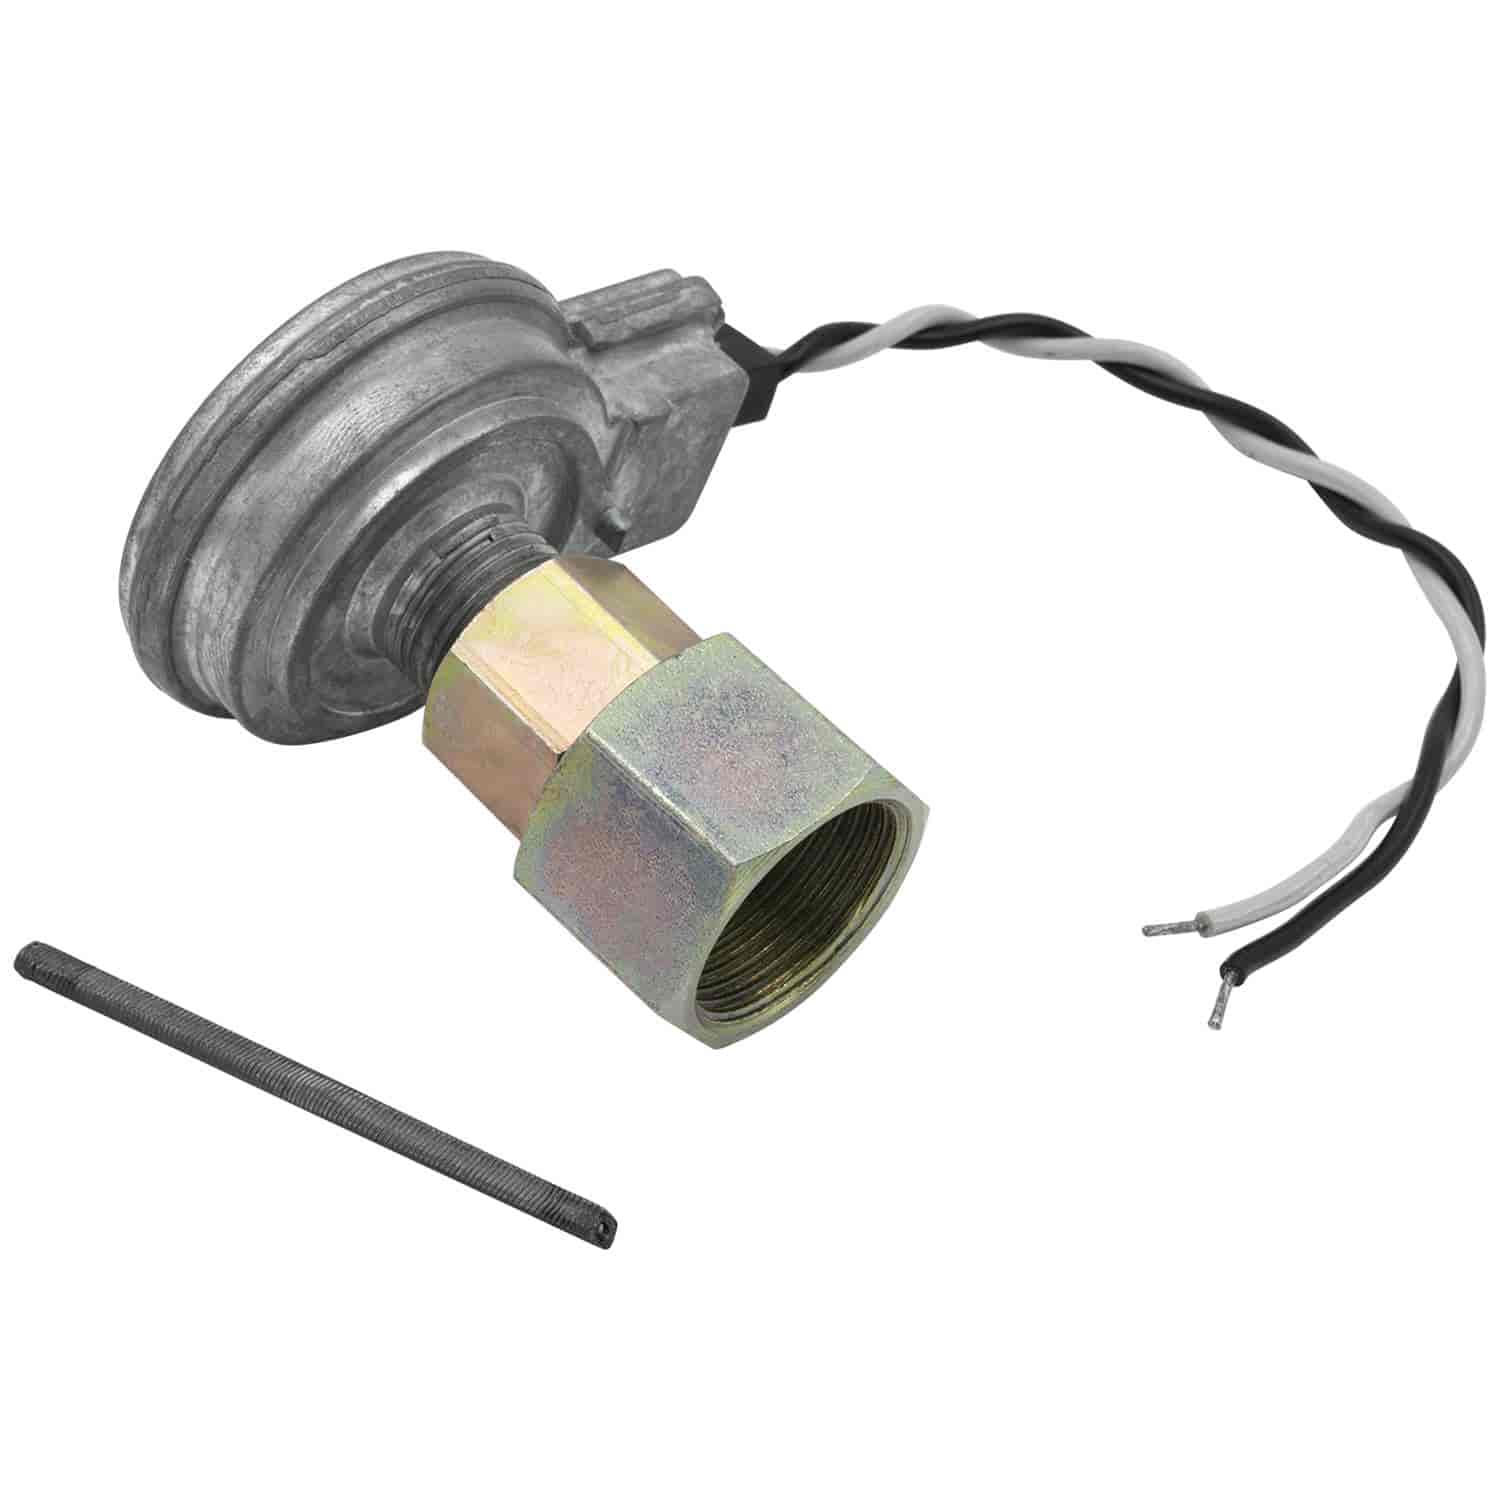 Variable Reluctance Speedometer Sender - GM, Chrysler Transmissions w/ 7/8 in. -18 Threaded Cable Output